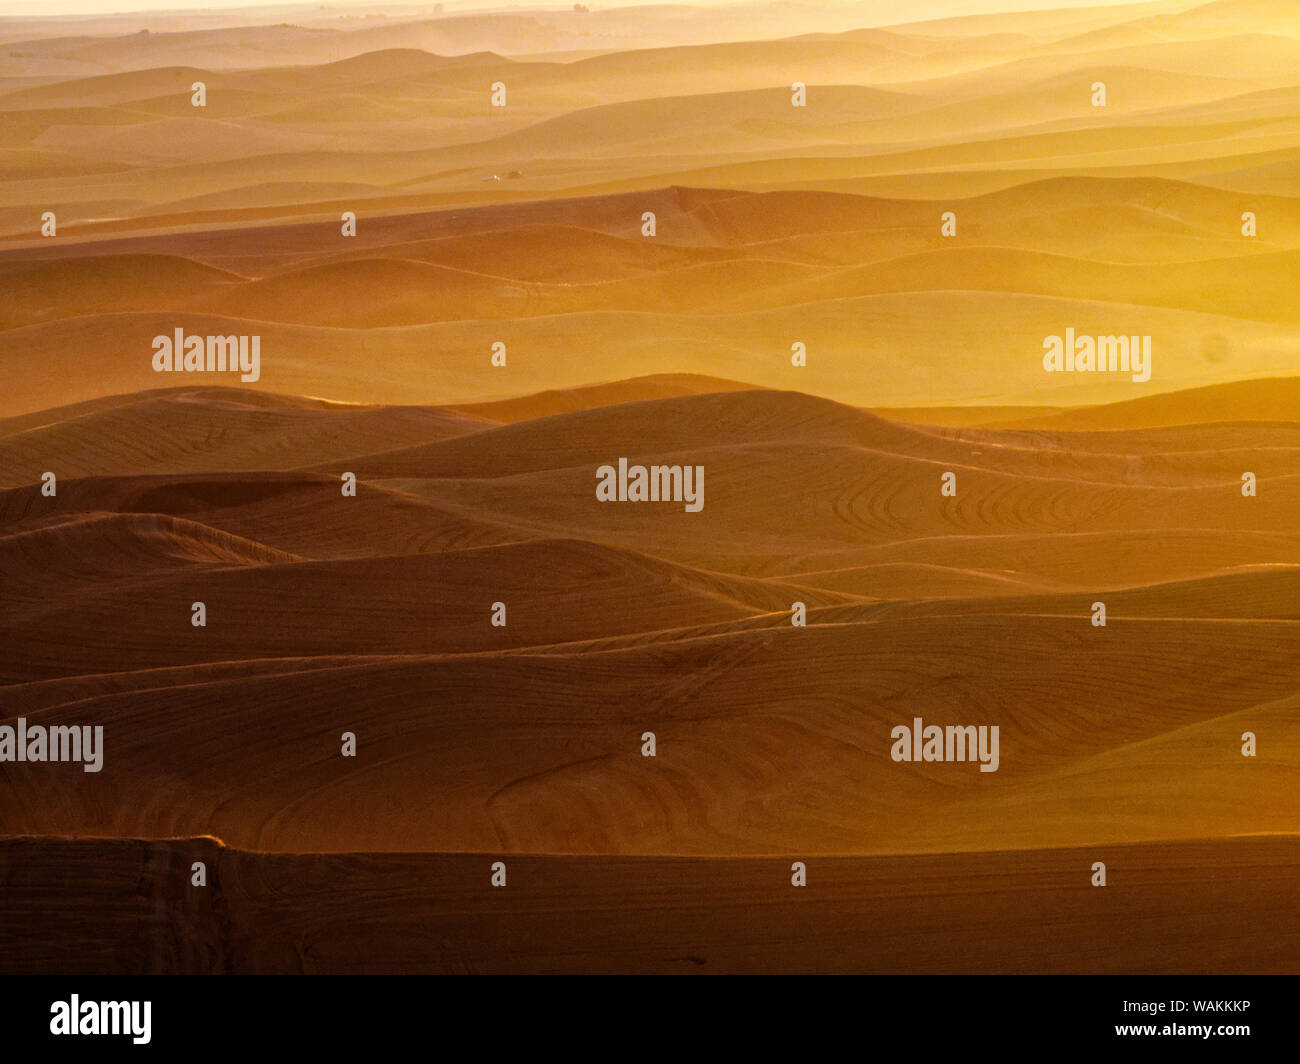 USA, Washington State, Palouse Region. Sunset over rolling hills with dust in the air Stock Photo